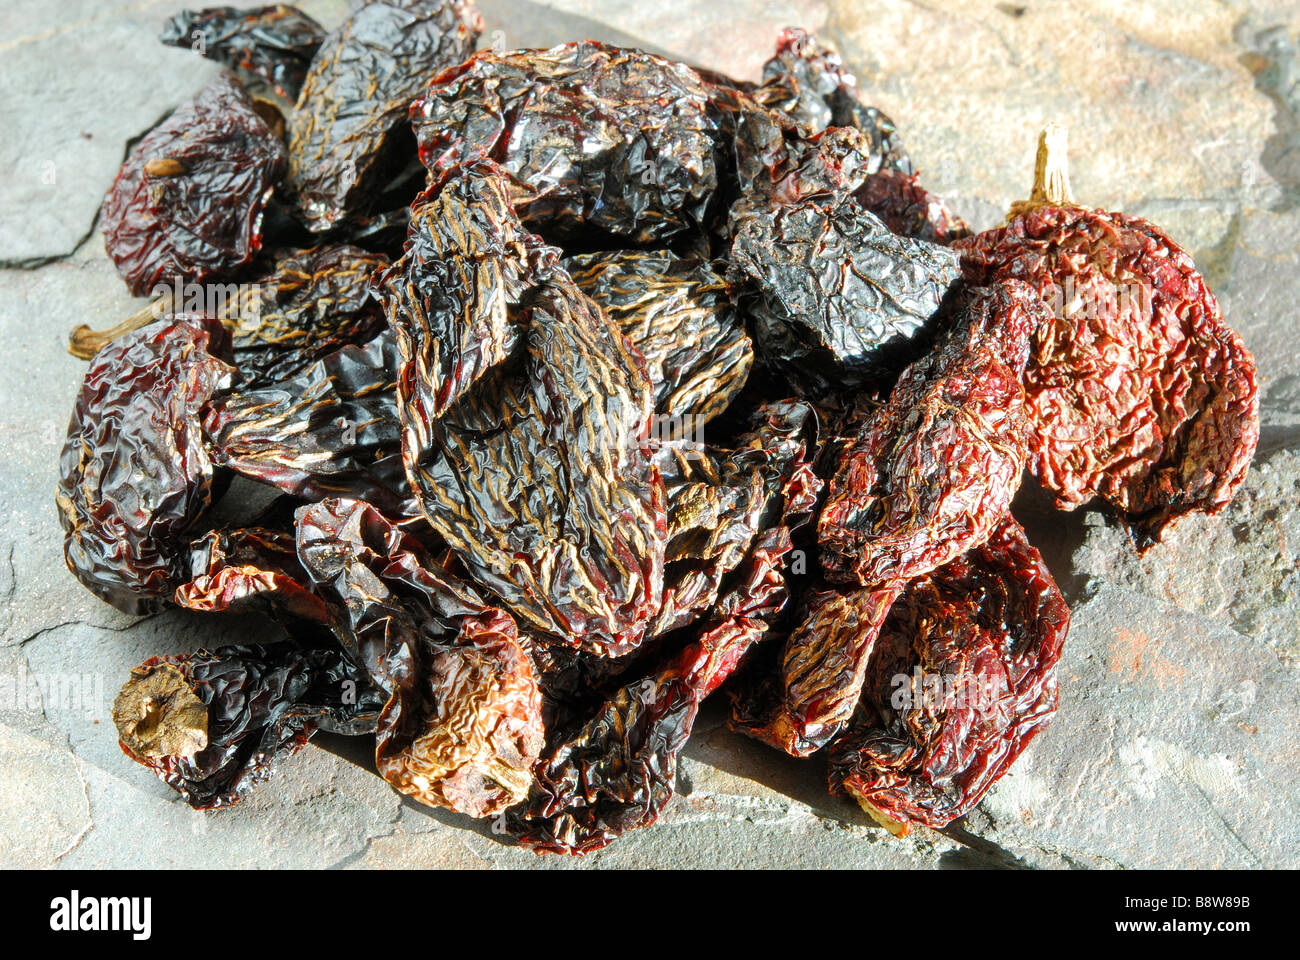 Chipotles 'Moritas'. Dried, smoked jalapeno chillies used to add a smoky heat to Mexican and TexMex dishes. Stock Photo